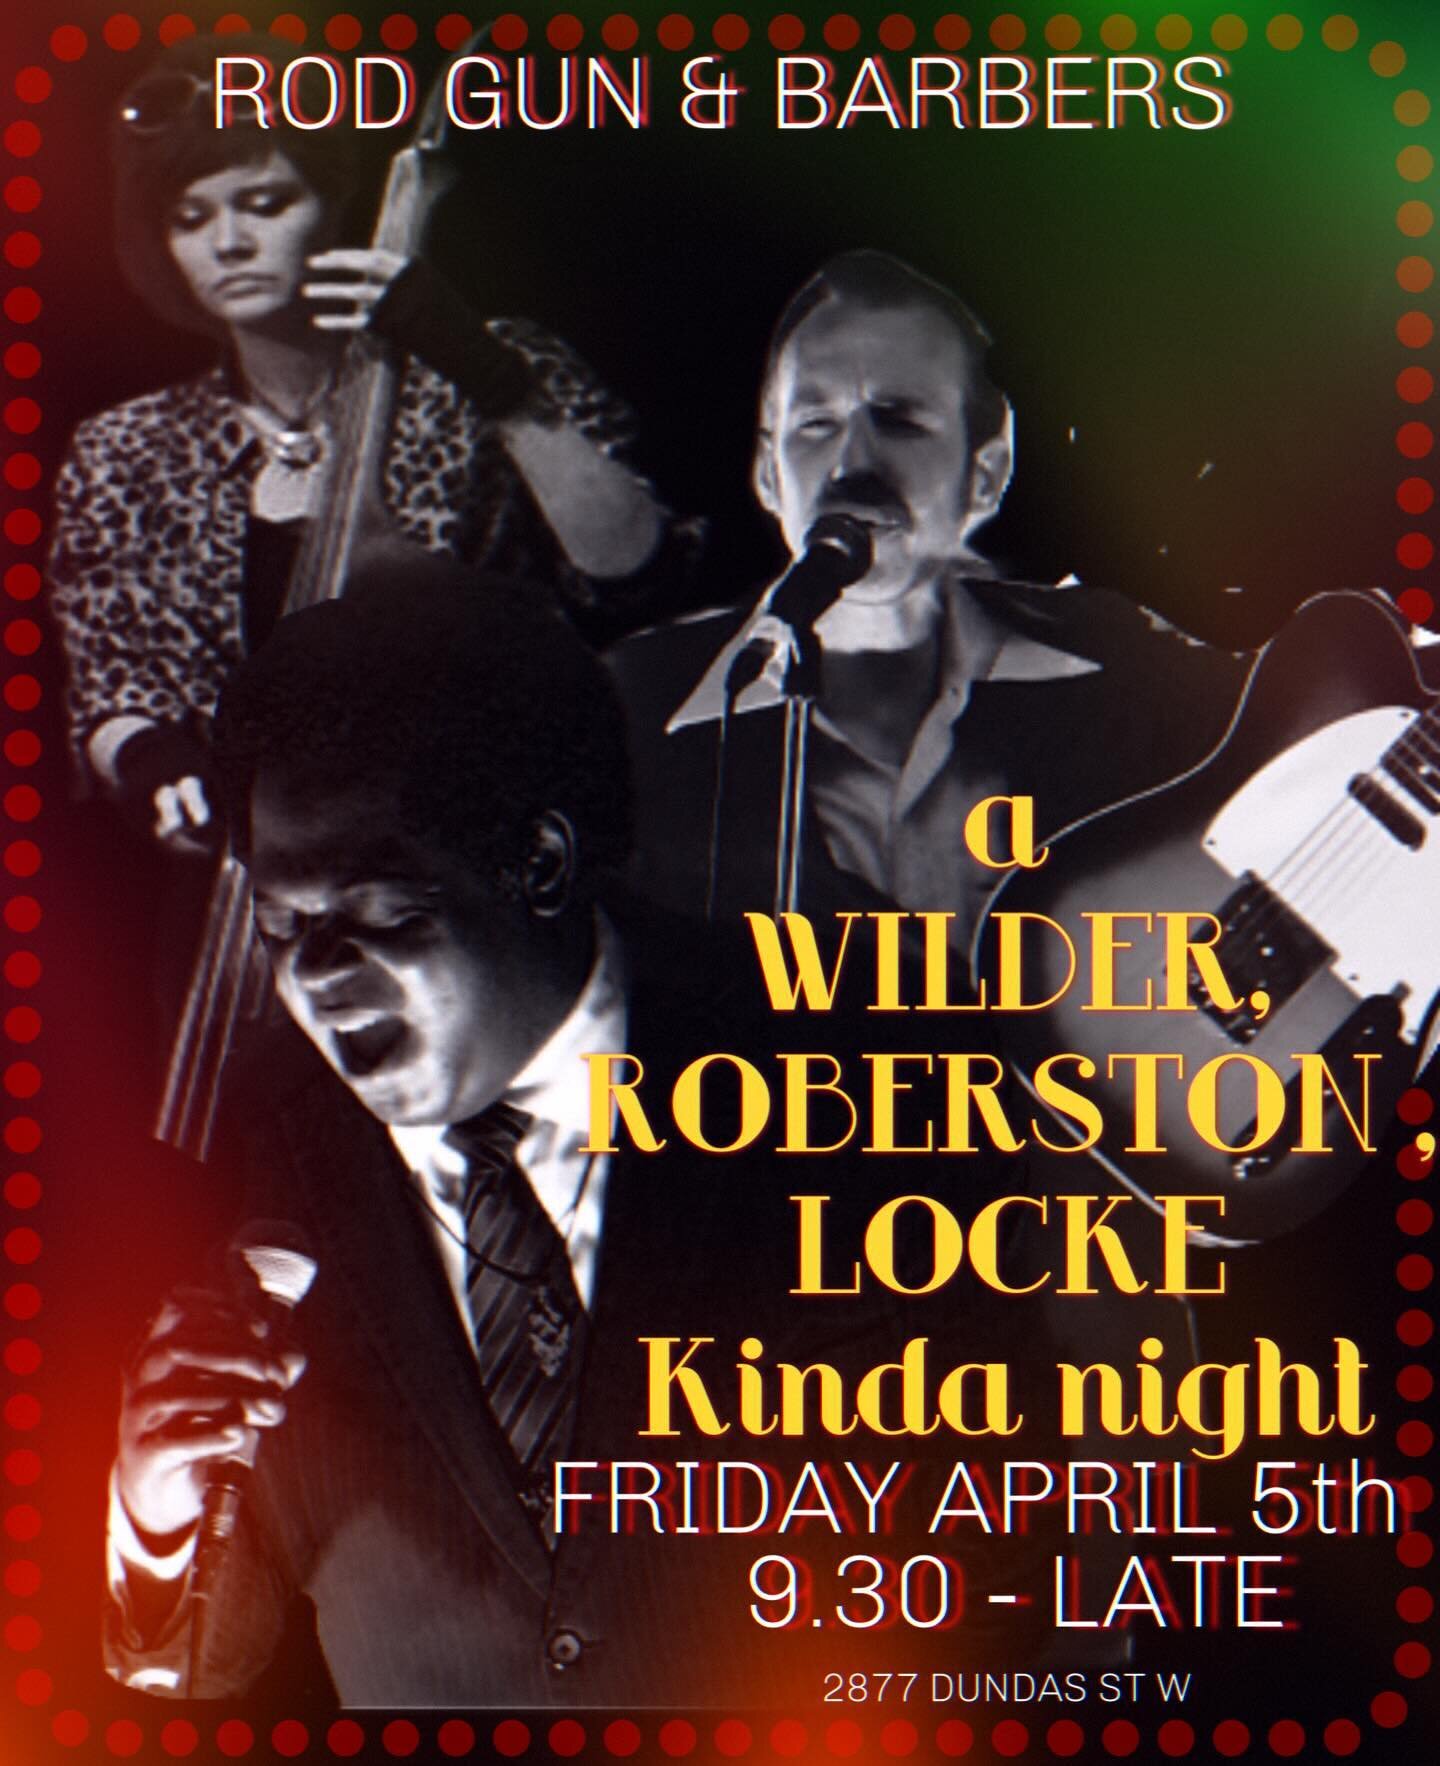 Wilder, Robertson &amp; Locke Trio, are with us on Friday!
Don&rsquo;t miss out!
John servin&rsquo; up your most favourite libations.
9.30- late!
@yousaviper @viviennewilder @nicholrobertson 
@timetravelinghippie @torontojunction 
#torontolivemusic #